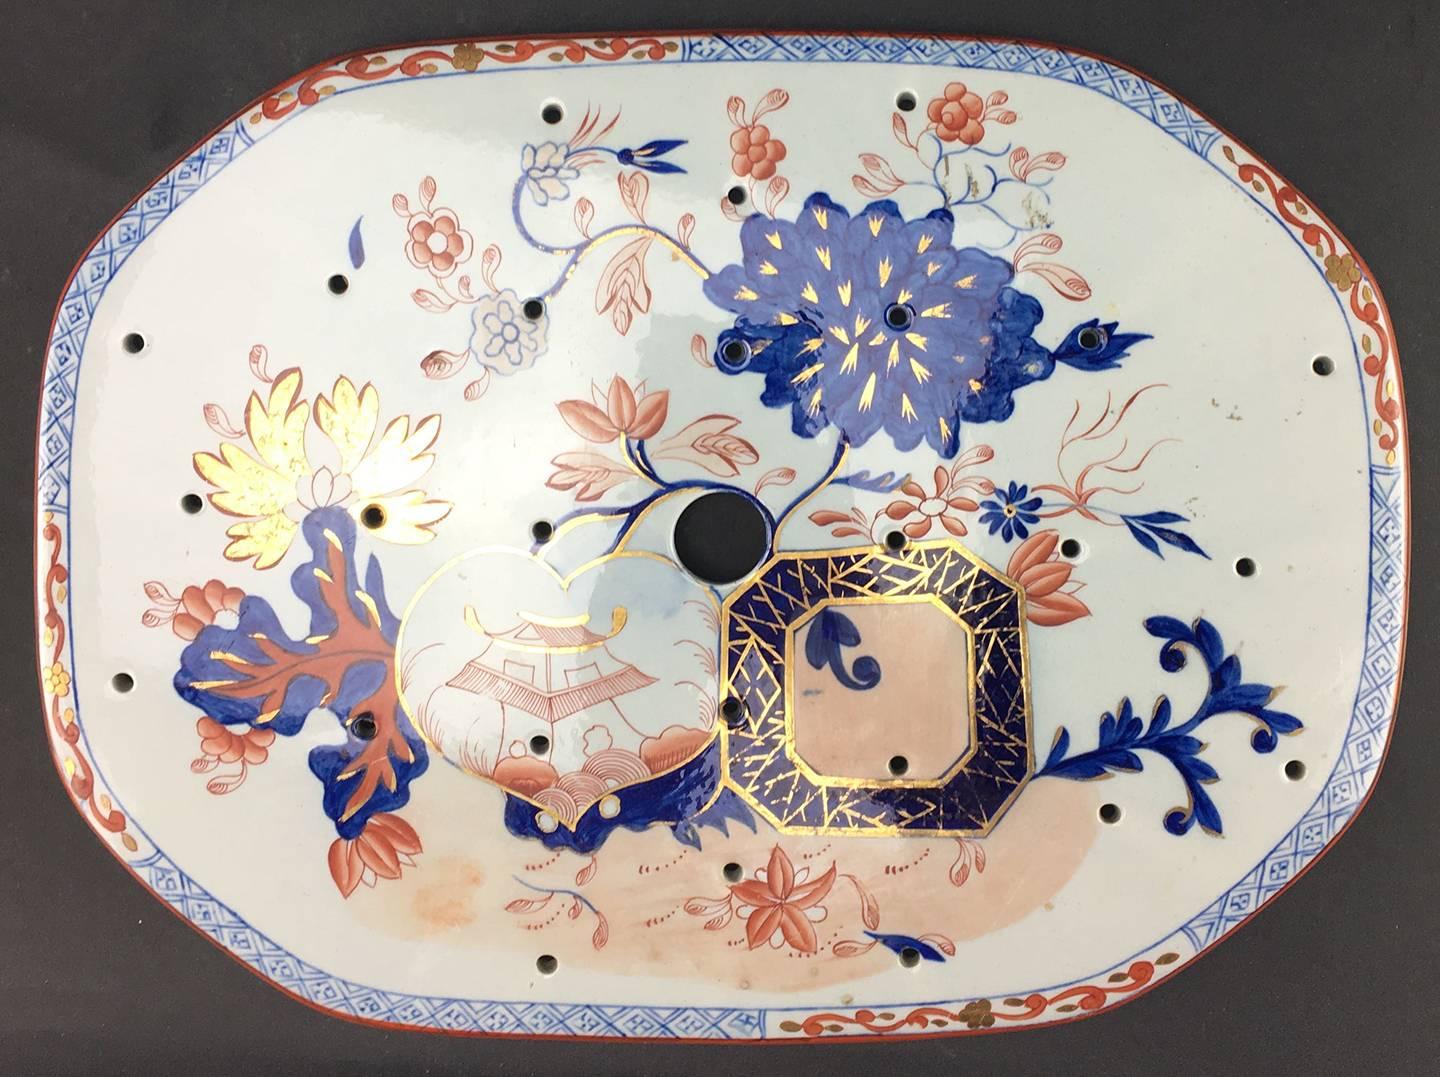 English Mason's Ironstone Imari canted cornered pierced Drainer 1820s printed in underglaze and overglaze cobalt blue, pale orange and iron red, with flourishes and touches of gold.

Impressed MASON